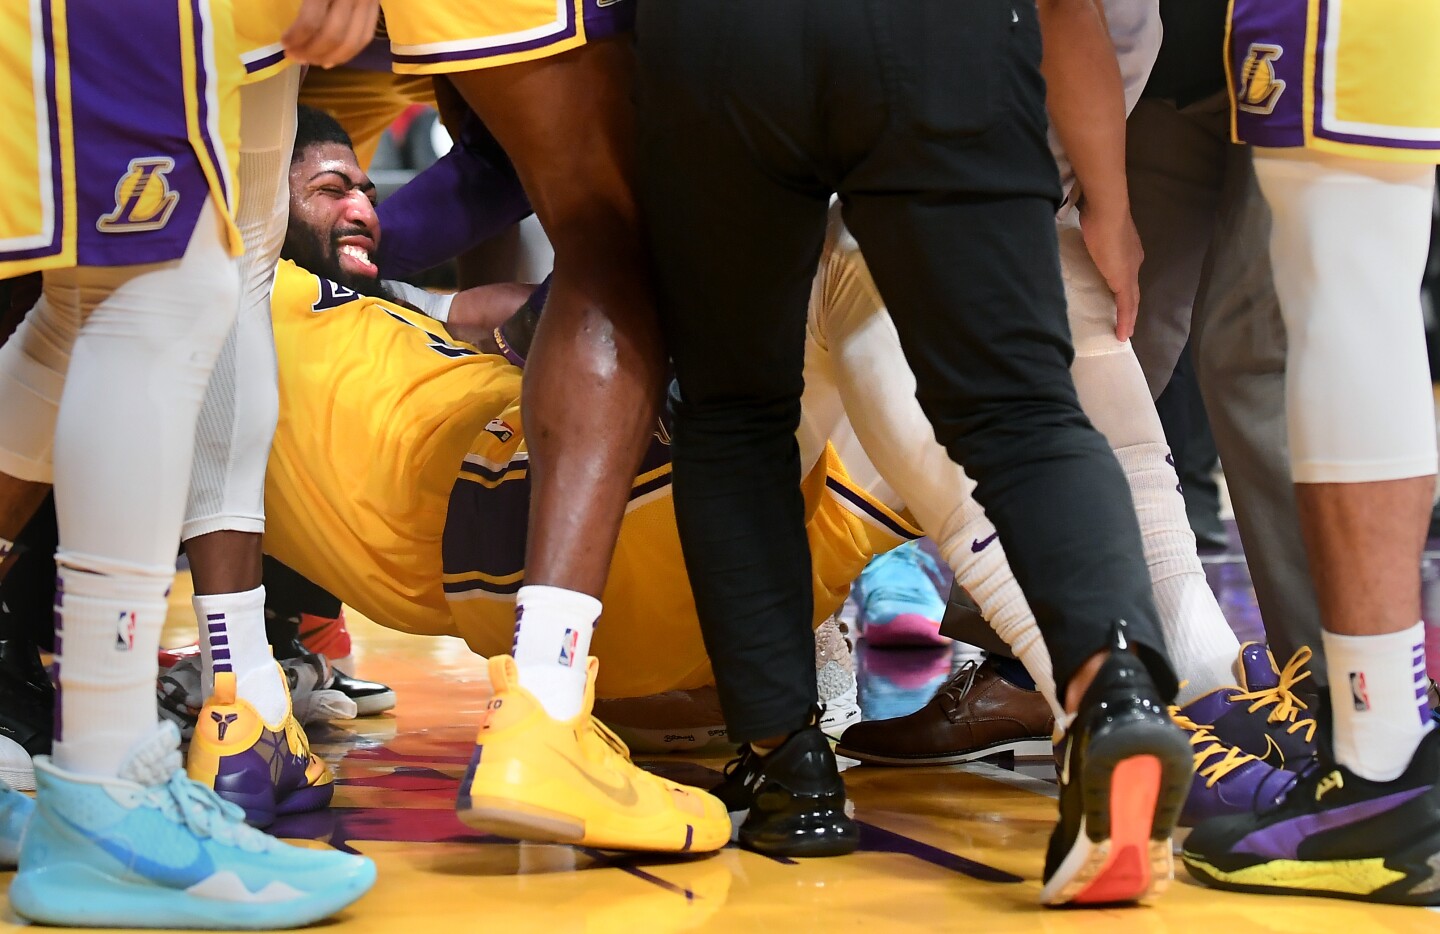 LOS ANGELES, CALIFORNIA JANUARY 7, 2020-Lakers Anthony Davis is helped off the court after falling on the floor against the Knicks in the 3rd quarter at the Staples Center Tuesday. (Wally Skalij/Los Angerles Times)